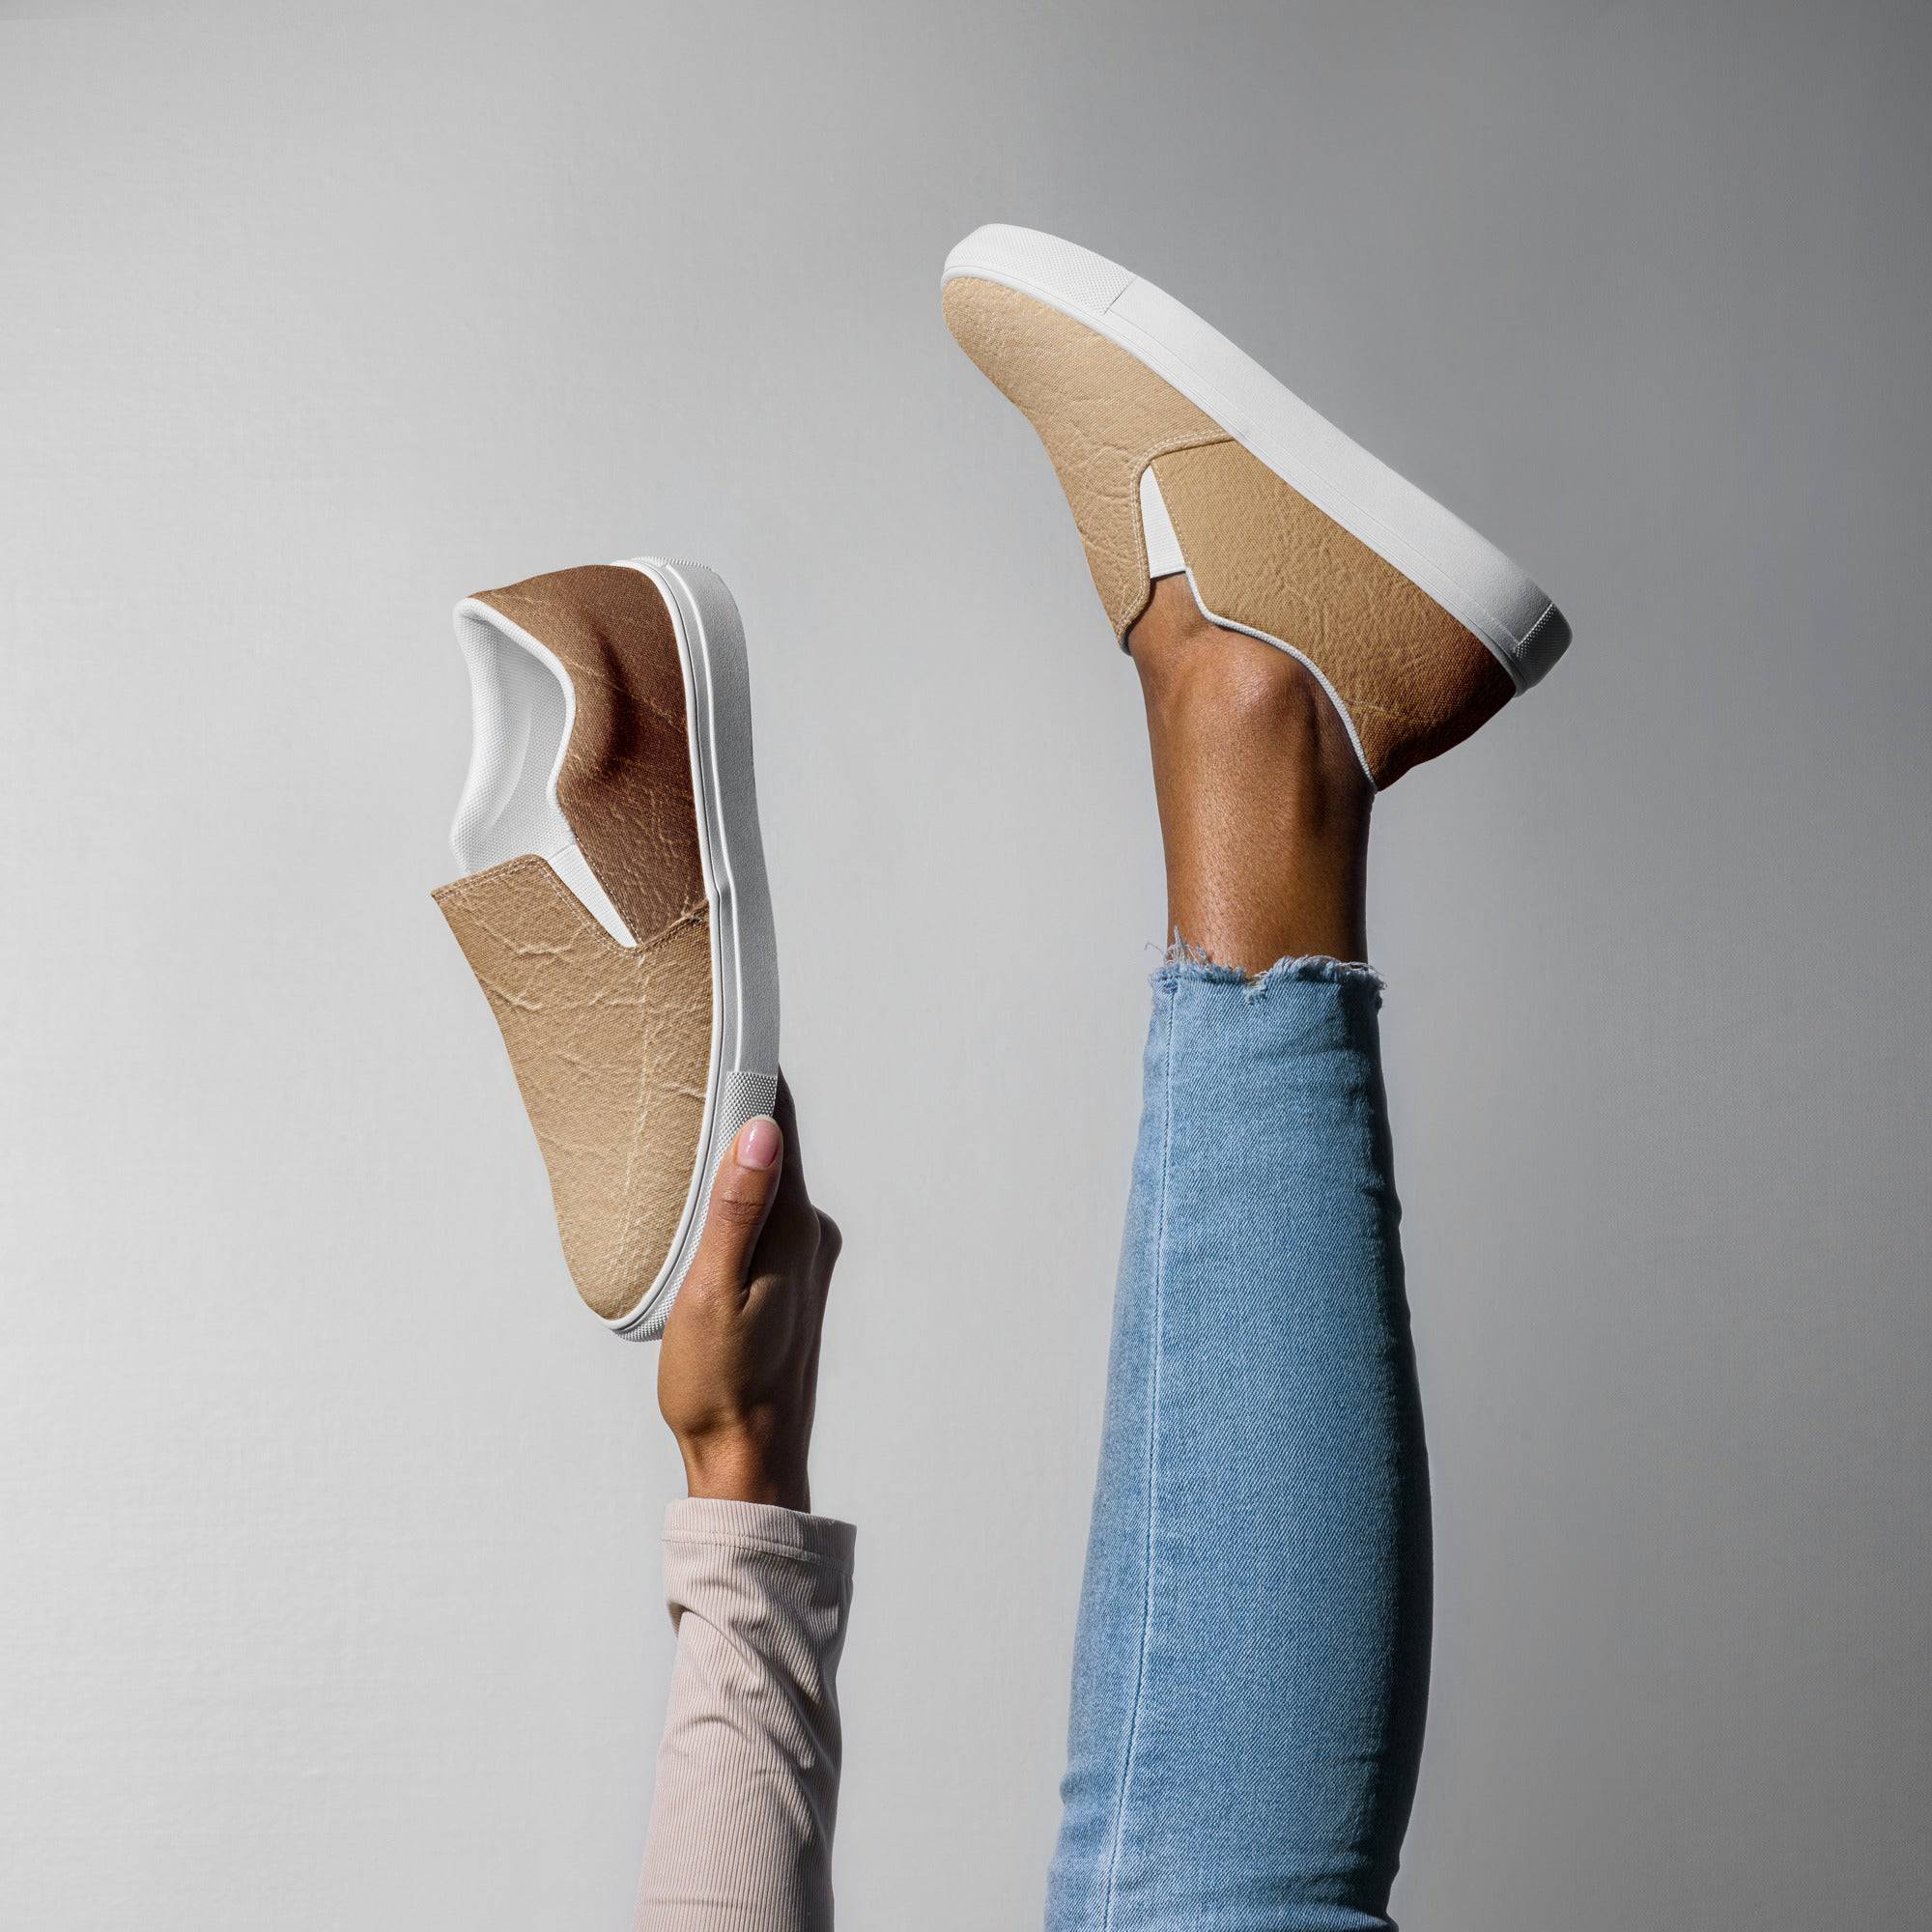 Nude Leather Print Slip On Canvas Shoes - TGC Boutique - Sneakers